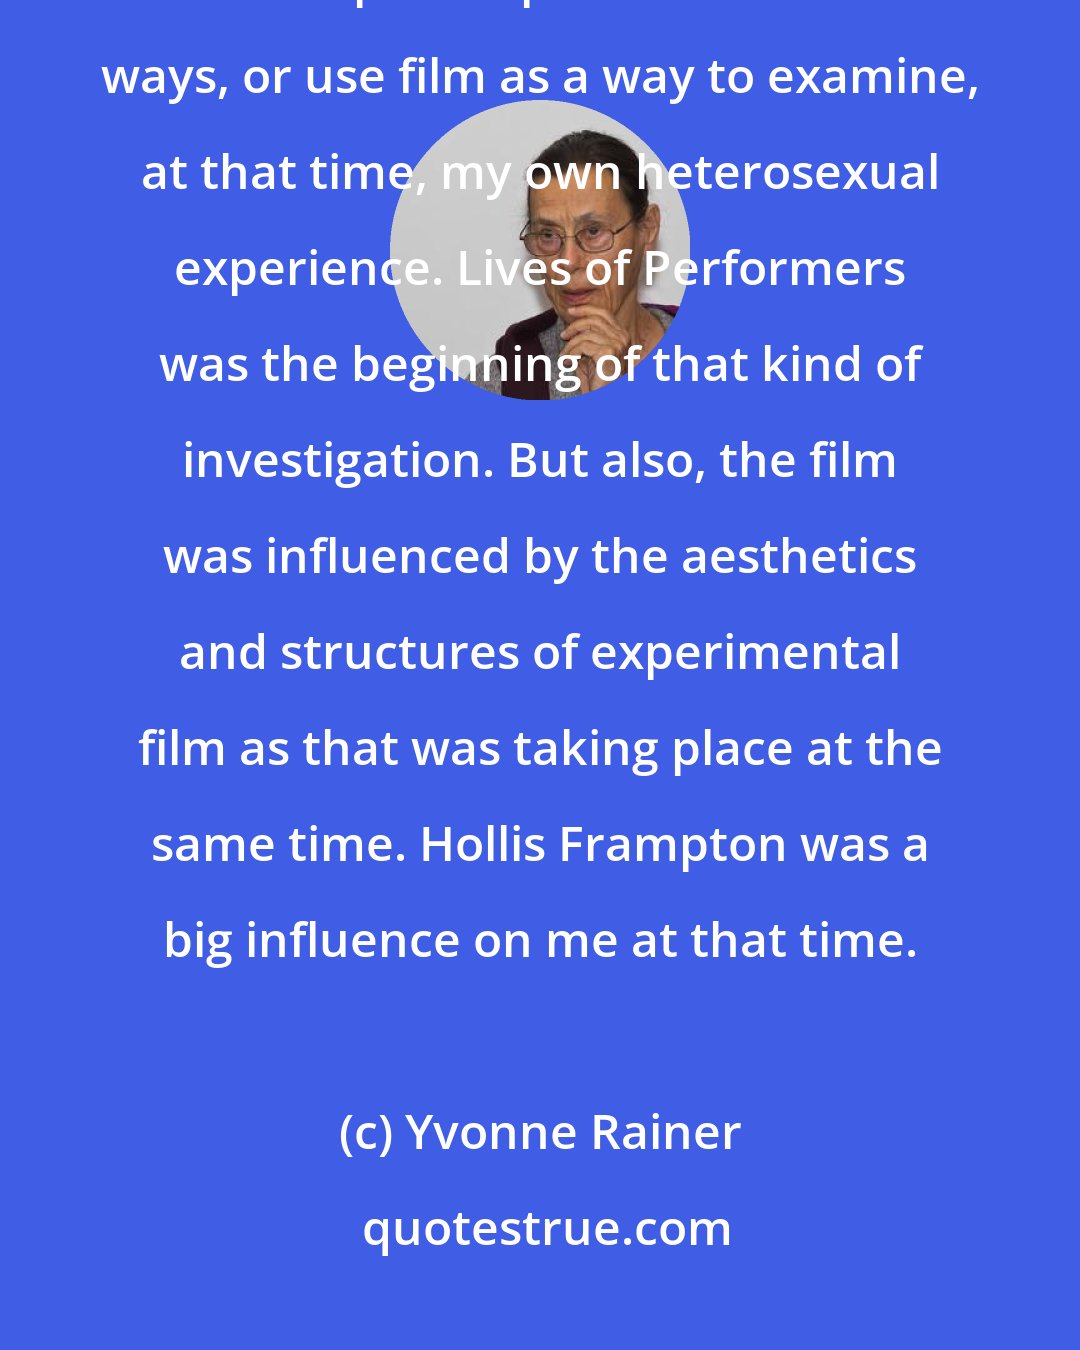 Yvonne Rainer: I should say that feminism gave me permission to deal with my own emotional life and put it up front in certain ways, or use film as a way to examine, at that time, my own heterosexual experience. Lives of Performers was the beginning of that kind of investigation. But also, the film was influenced by the aesthetics and structures of experimental film as that was taking place at the same time. Hollis Frampton was a big influence on me at that time.